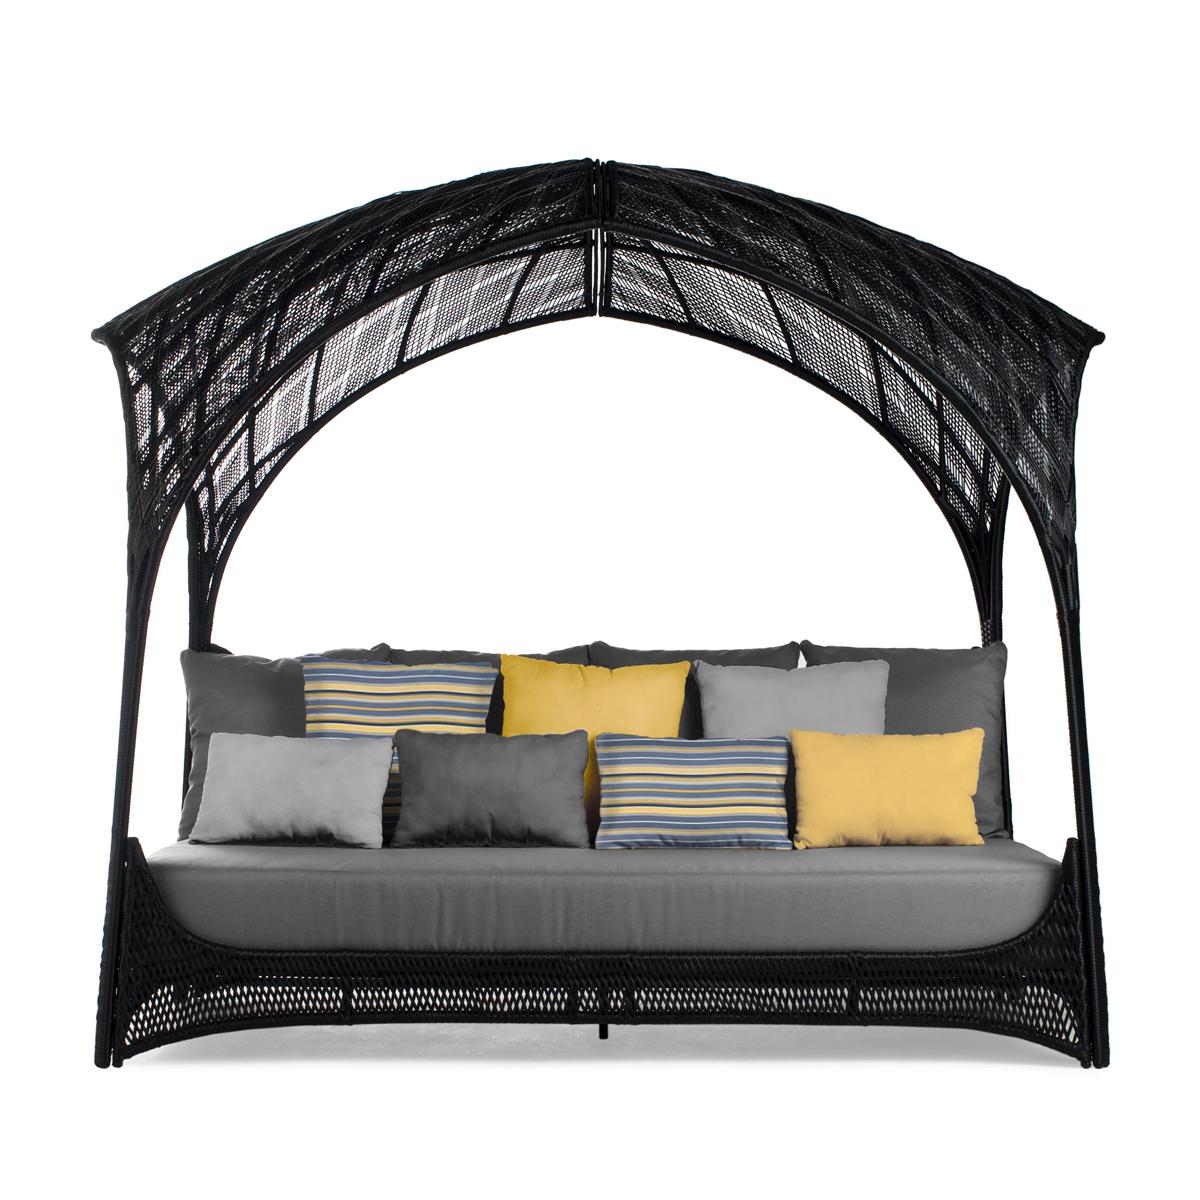 Daybed hanging with structure in steel and polyethylene.
With cushion seat and back included. Colors finish in linen
cream (indoor), or grey or light grey (outdoor). Structure available
in black or in White. Lead time production if on stock 2-3